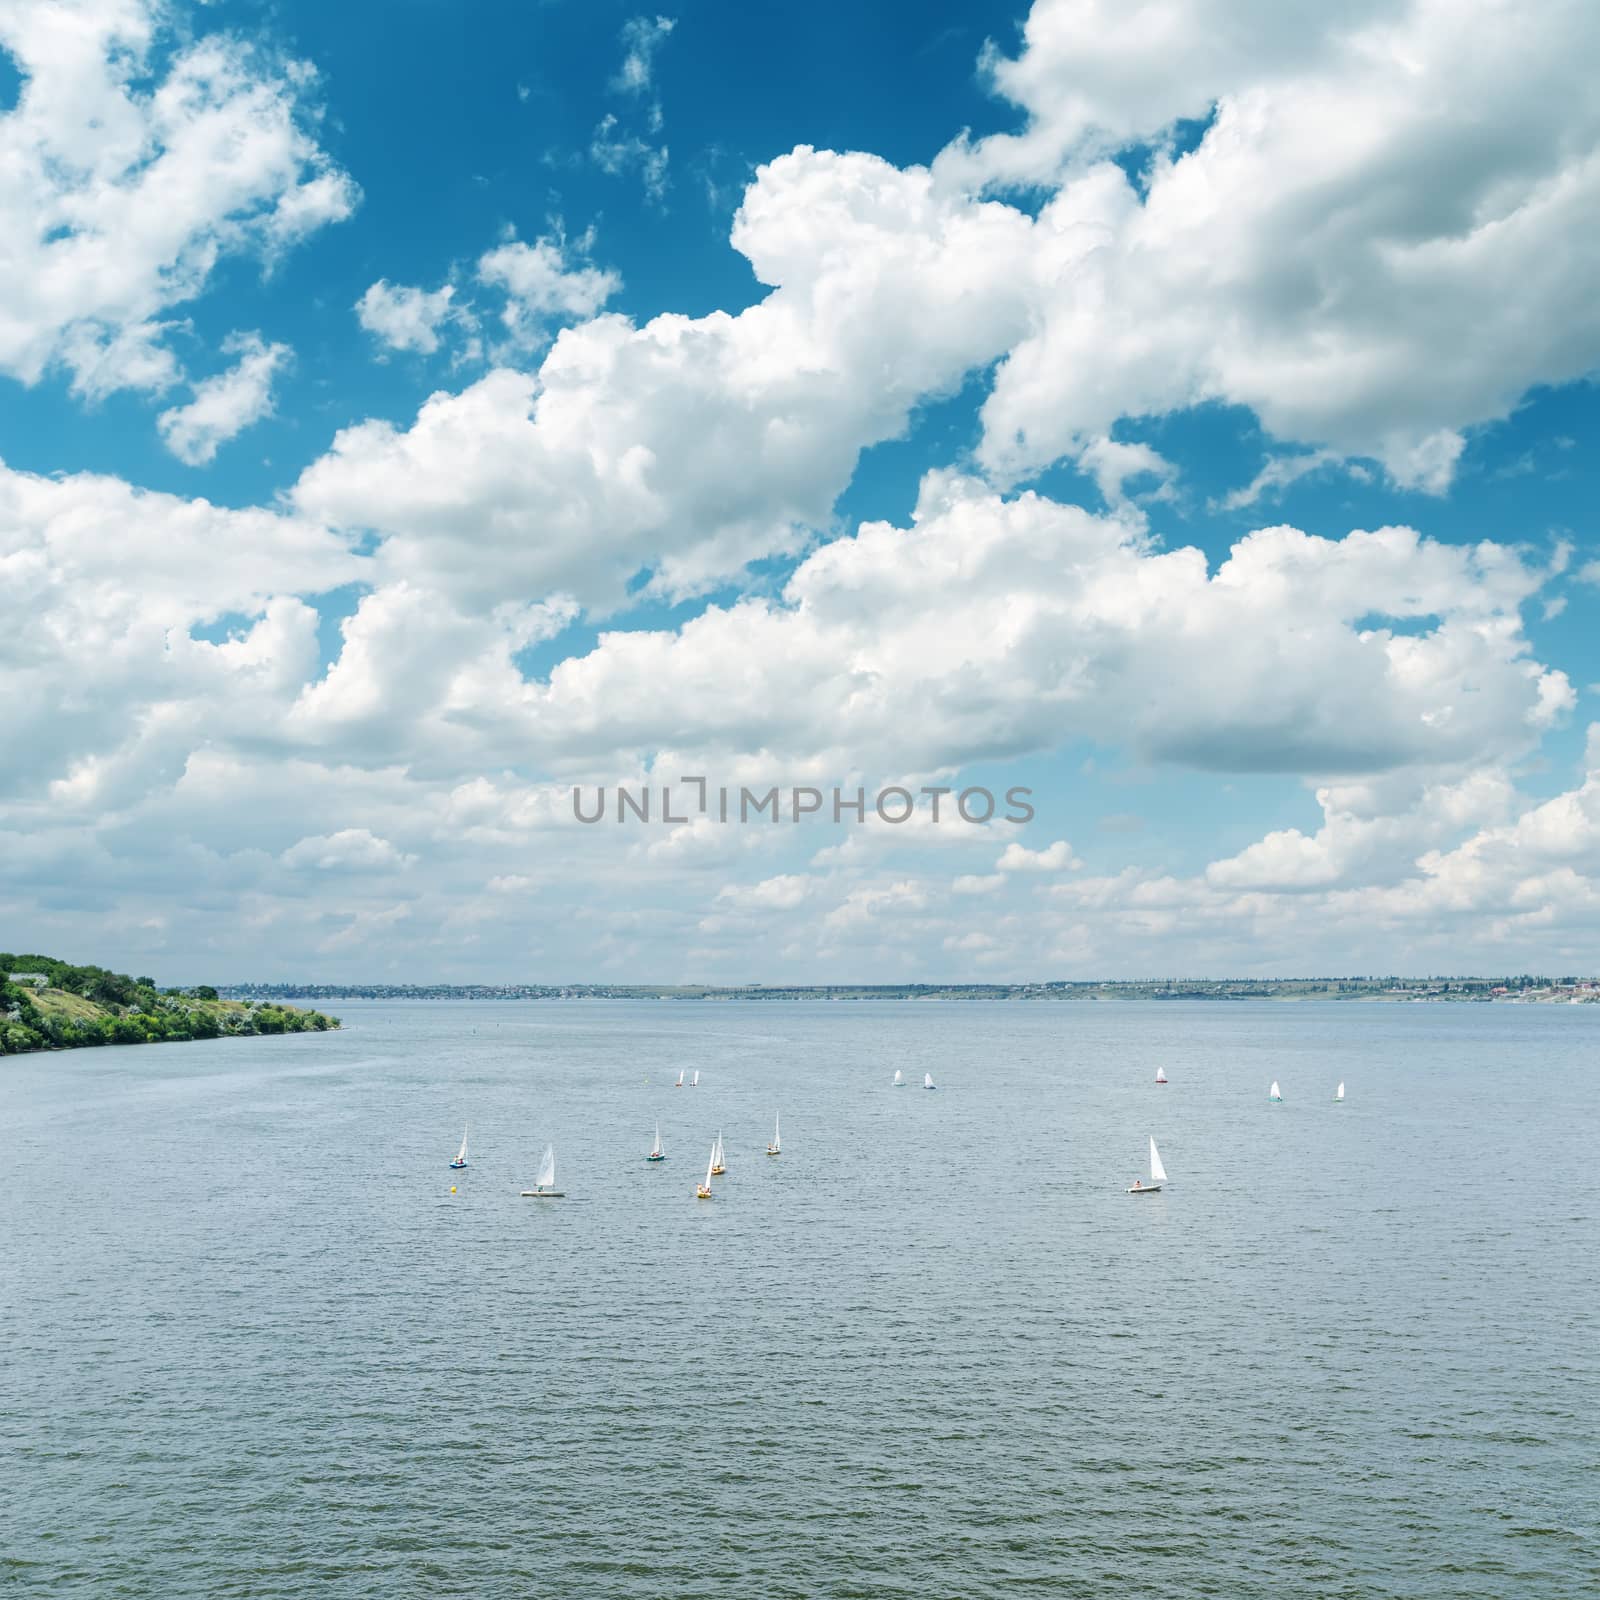 river with white yachts and cloudy sky